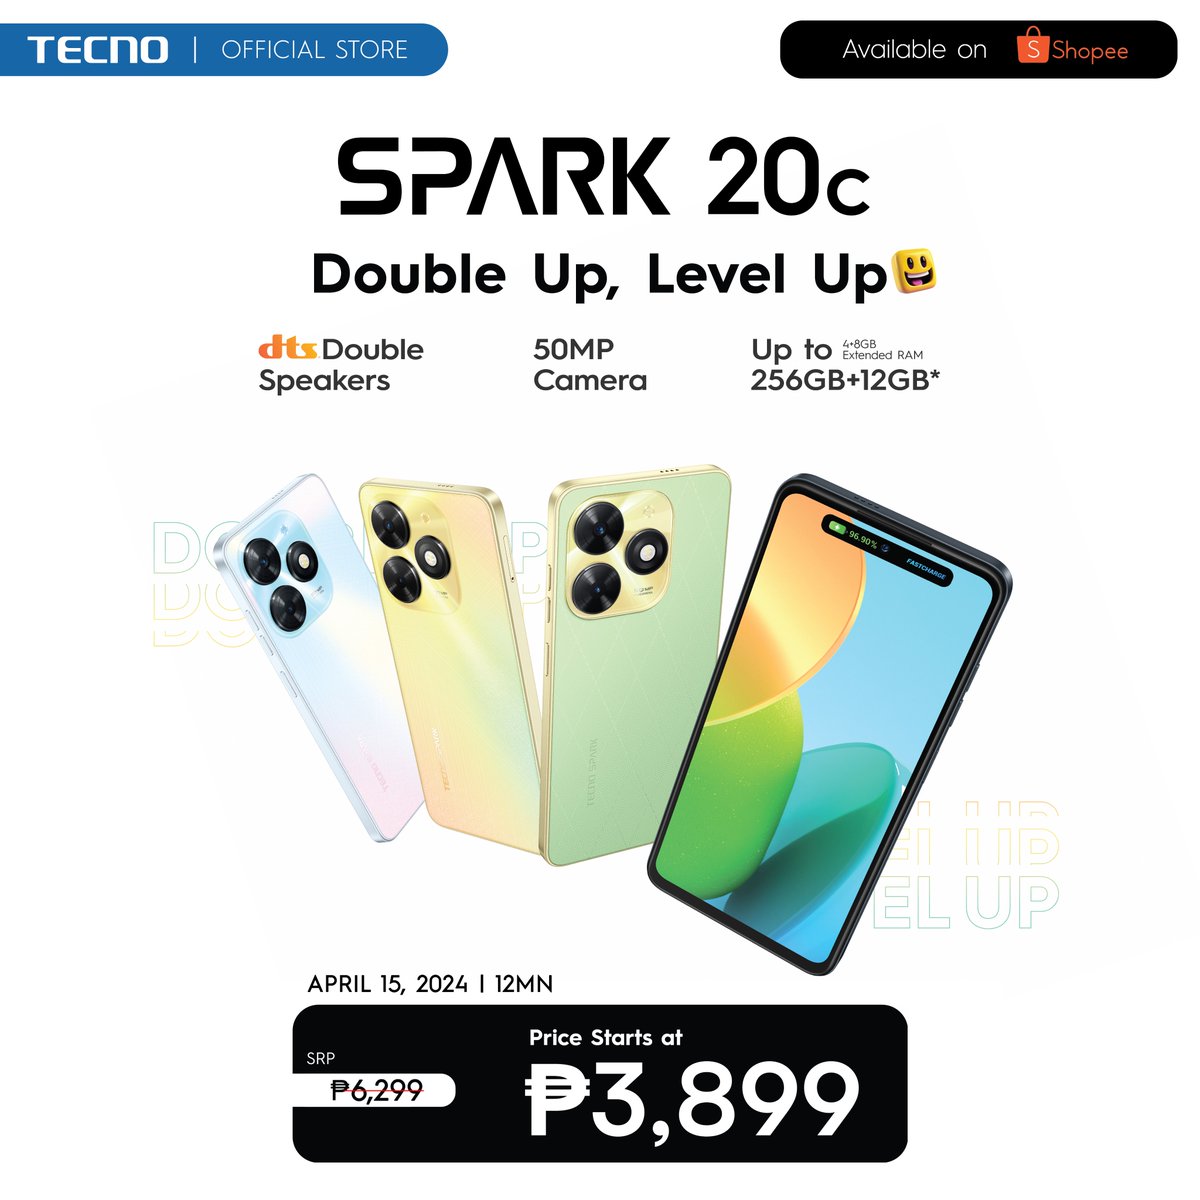 Don't miss out on the ultimate Payday Sale deal! Get your hands on the TECNO #SPARK20C featuring 12GB RAM and a massive 256GB ROM, all for just P3,899 starting April 15 at 12MN. Shopee: bit.ly/SPK20CNEW #TECNOSPARK20C #DoubleUpLevelUp #TECNOPhilippines